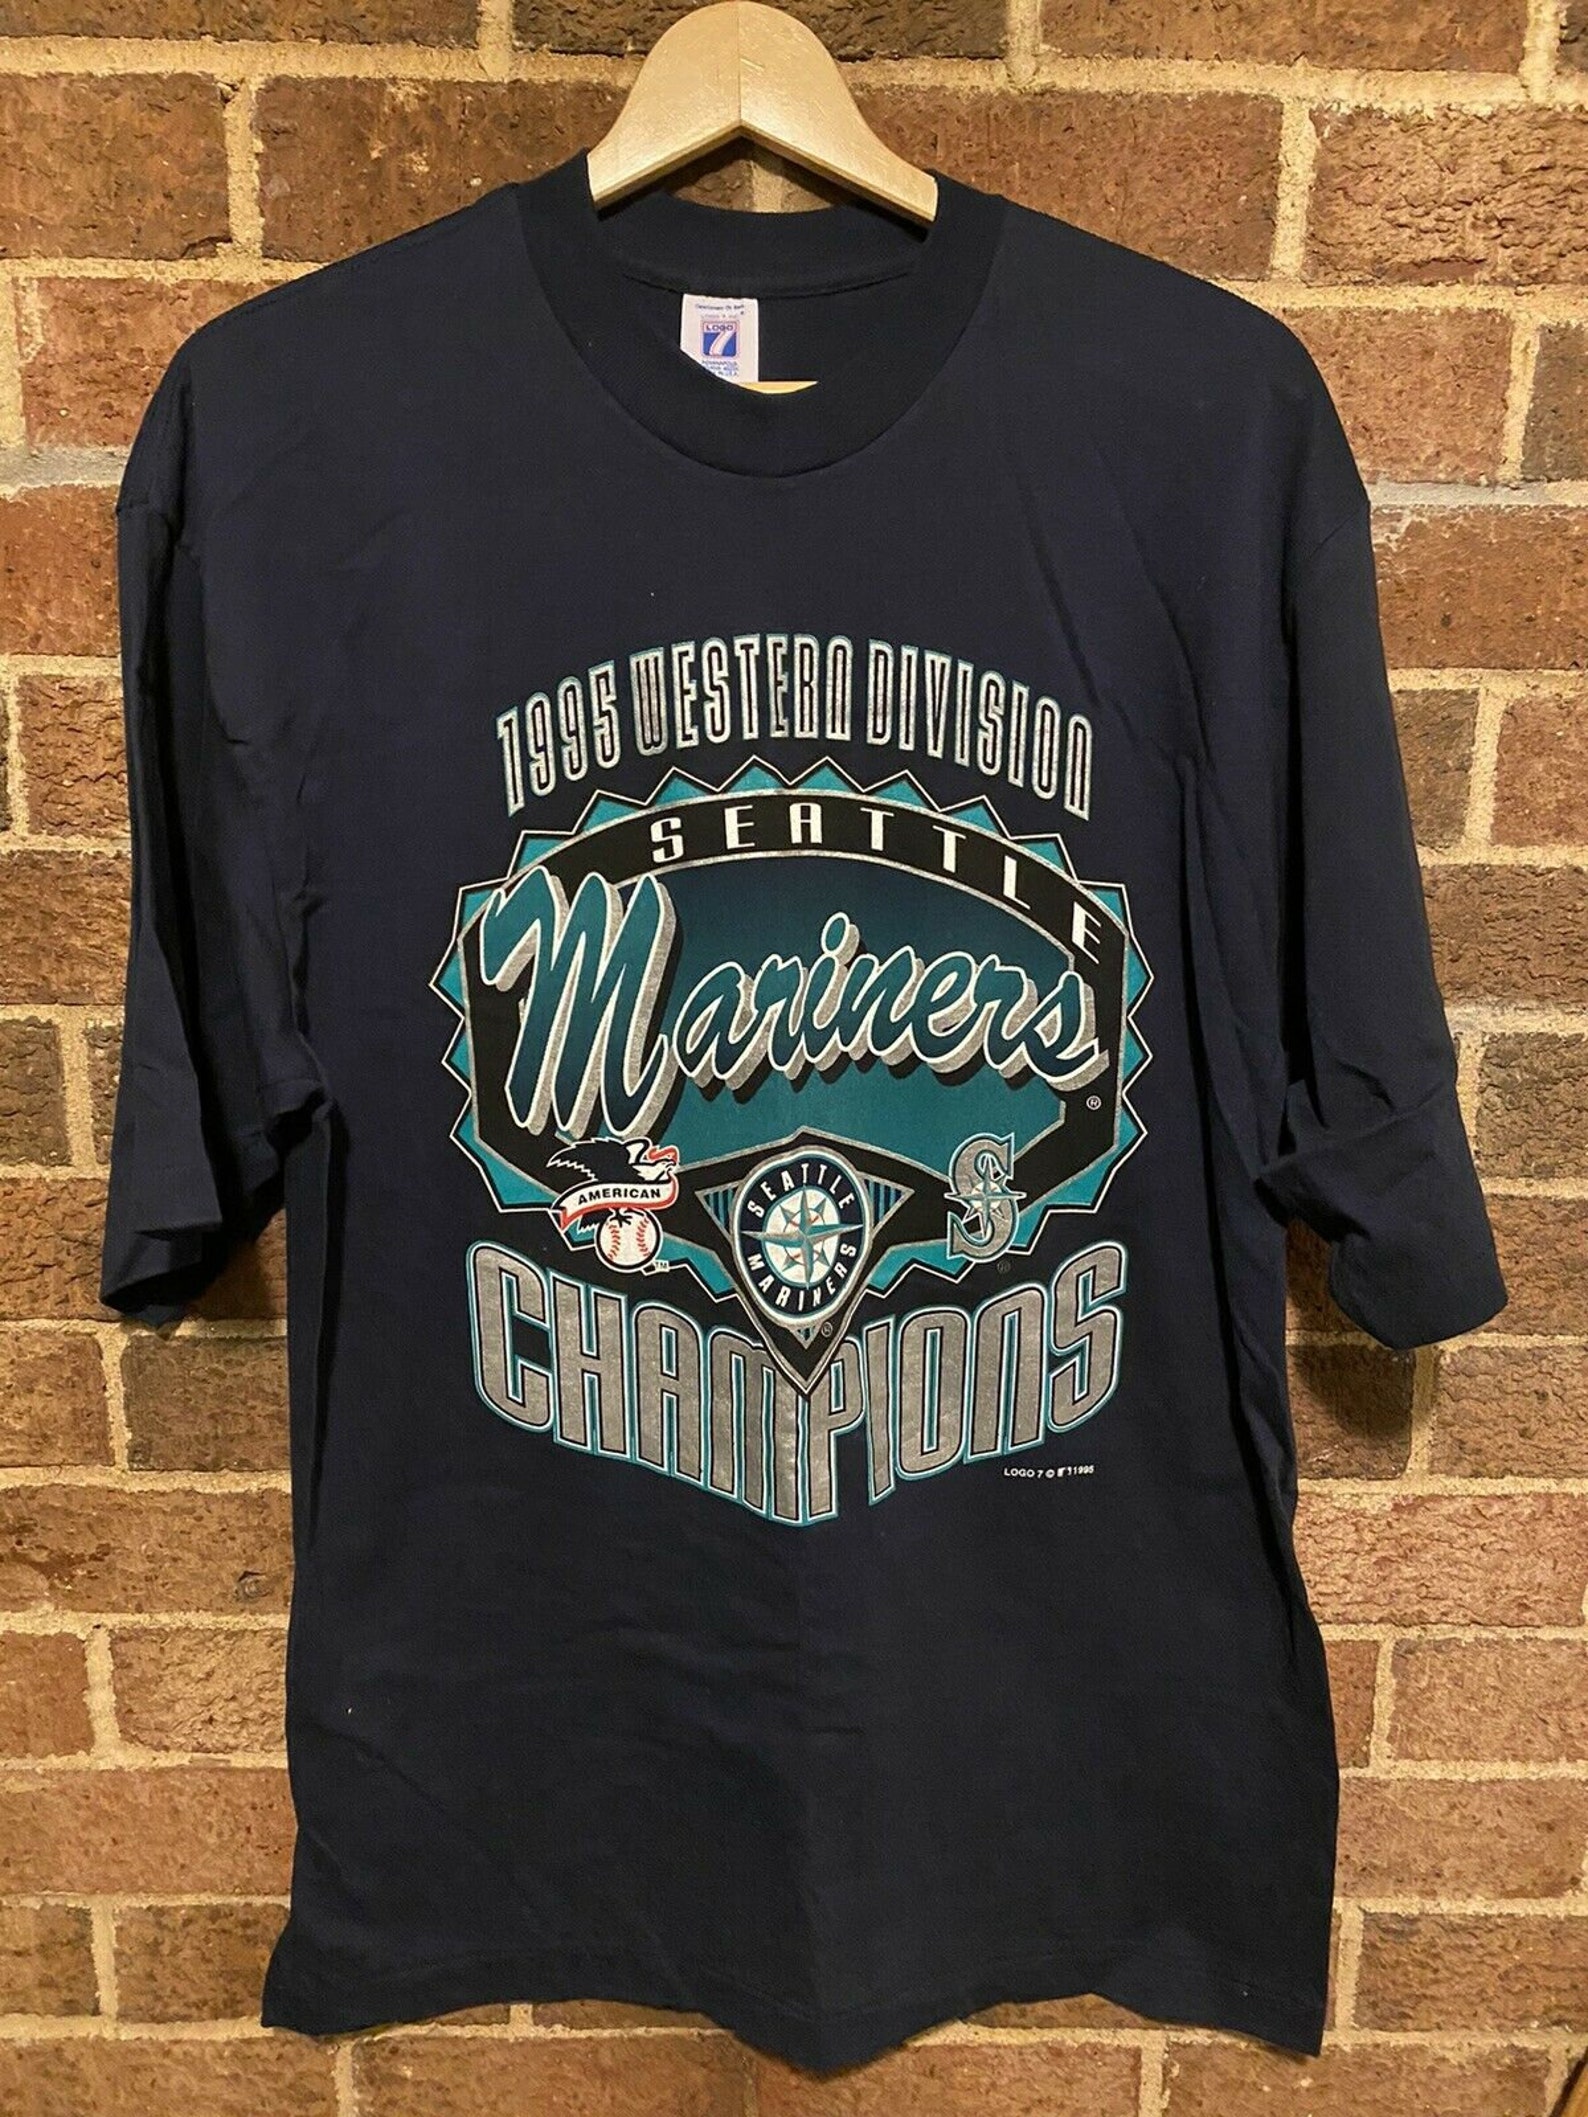 Vintage 90s 1995 seattle mariners Western Division Champions | Etsy